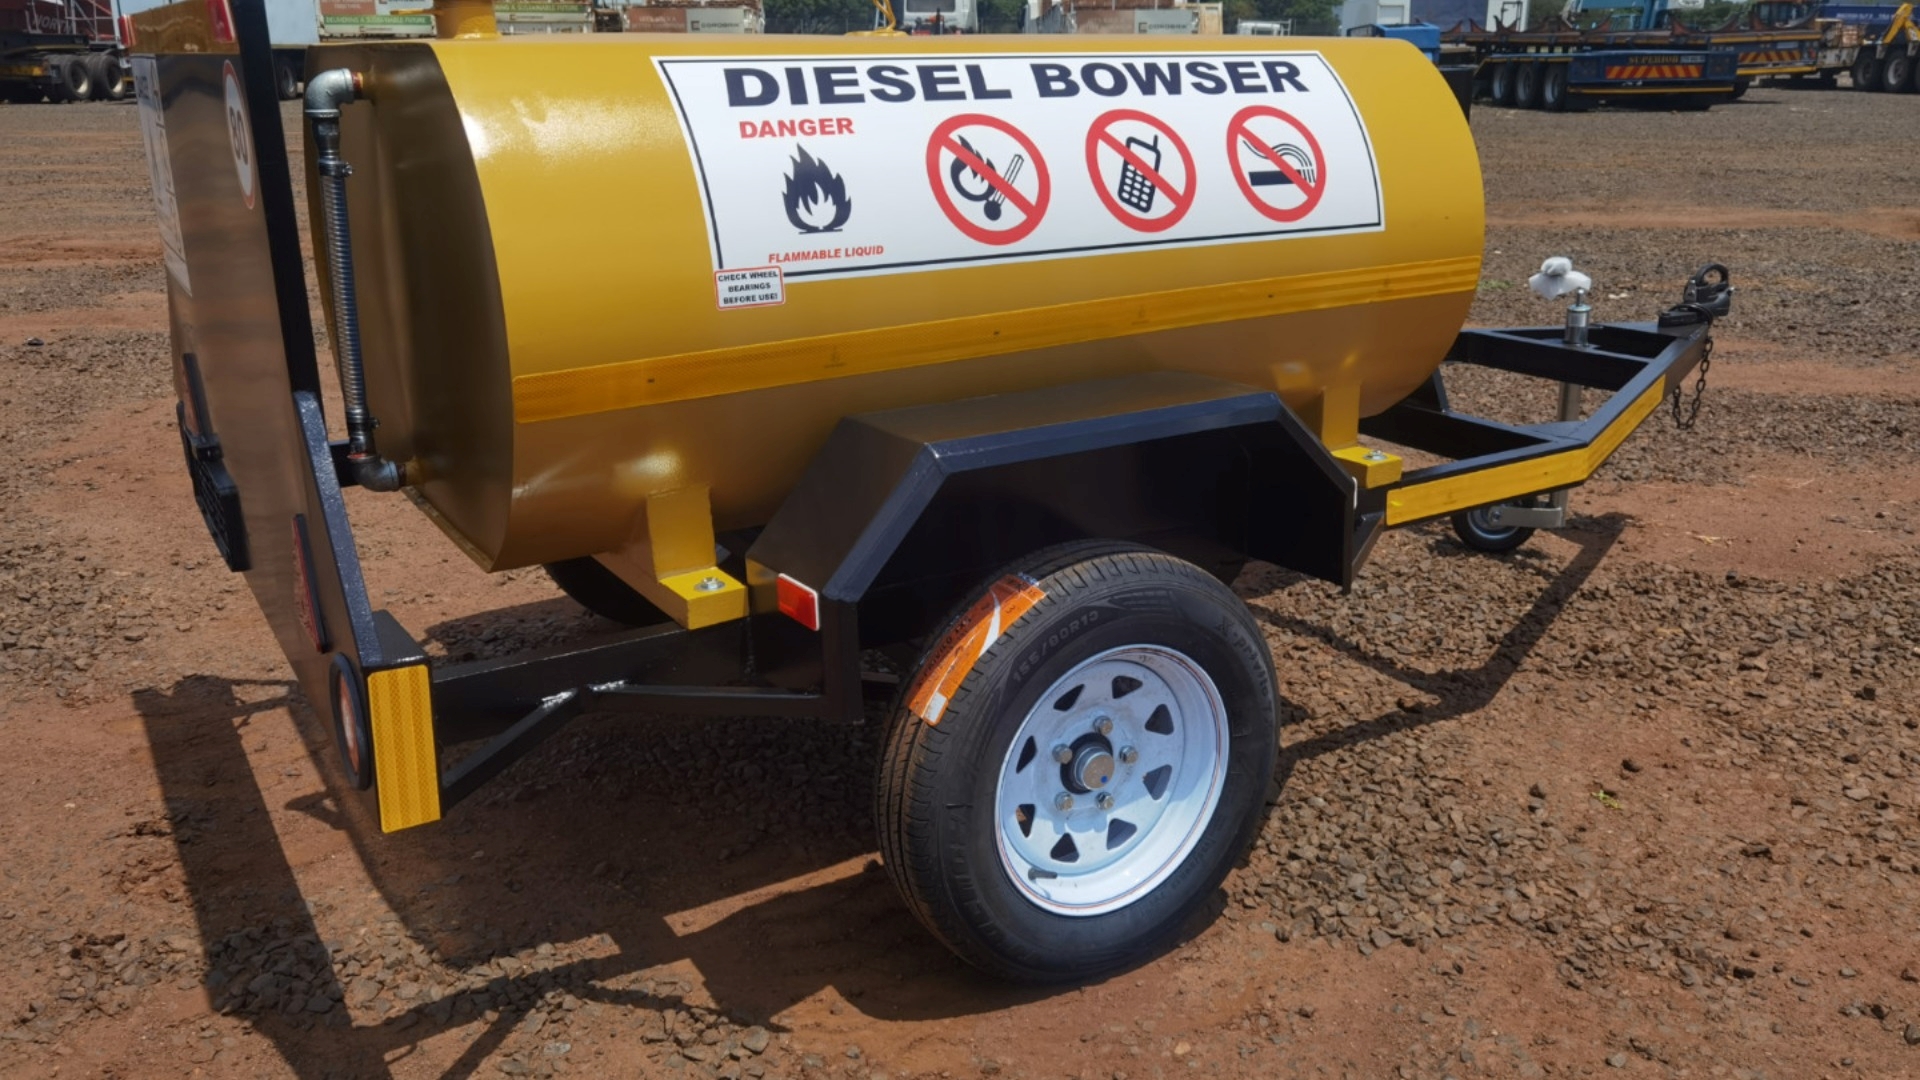 Diesel bowser trailer 1000l DIESEL BOWSER   NEW UNUSED for sale by WCT Auctions Pty Ltd  | Truck & Trailer Marketplaces